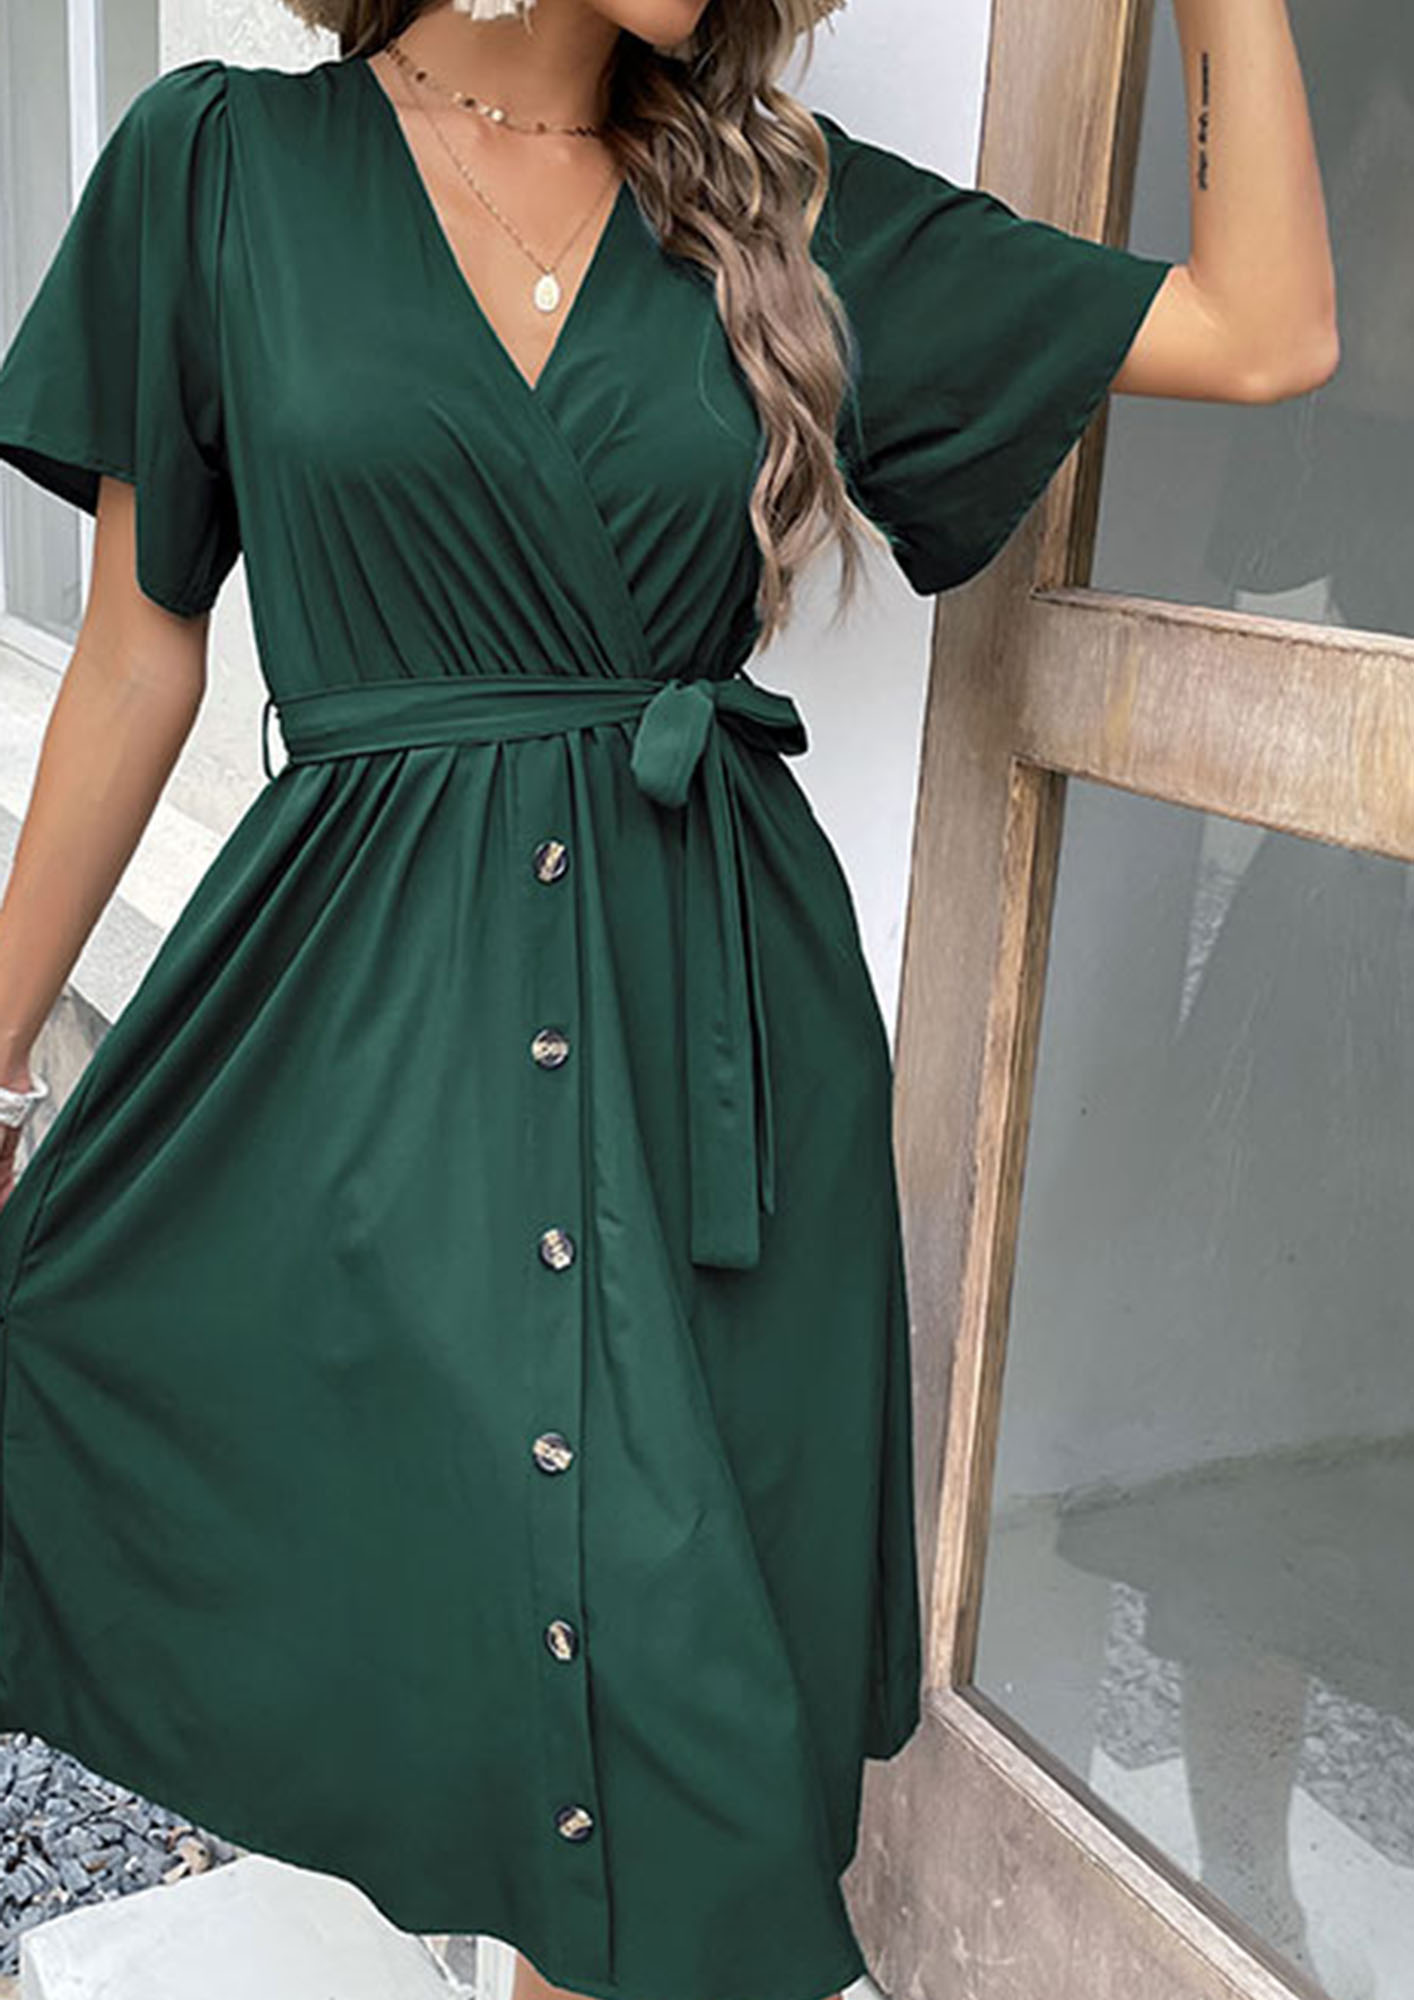 Green Gowns Online Latest Designs of Green Gowns Shopping